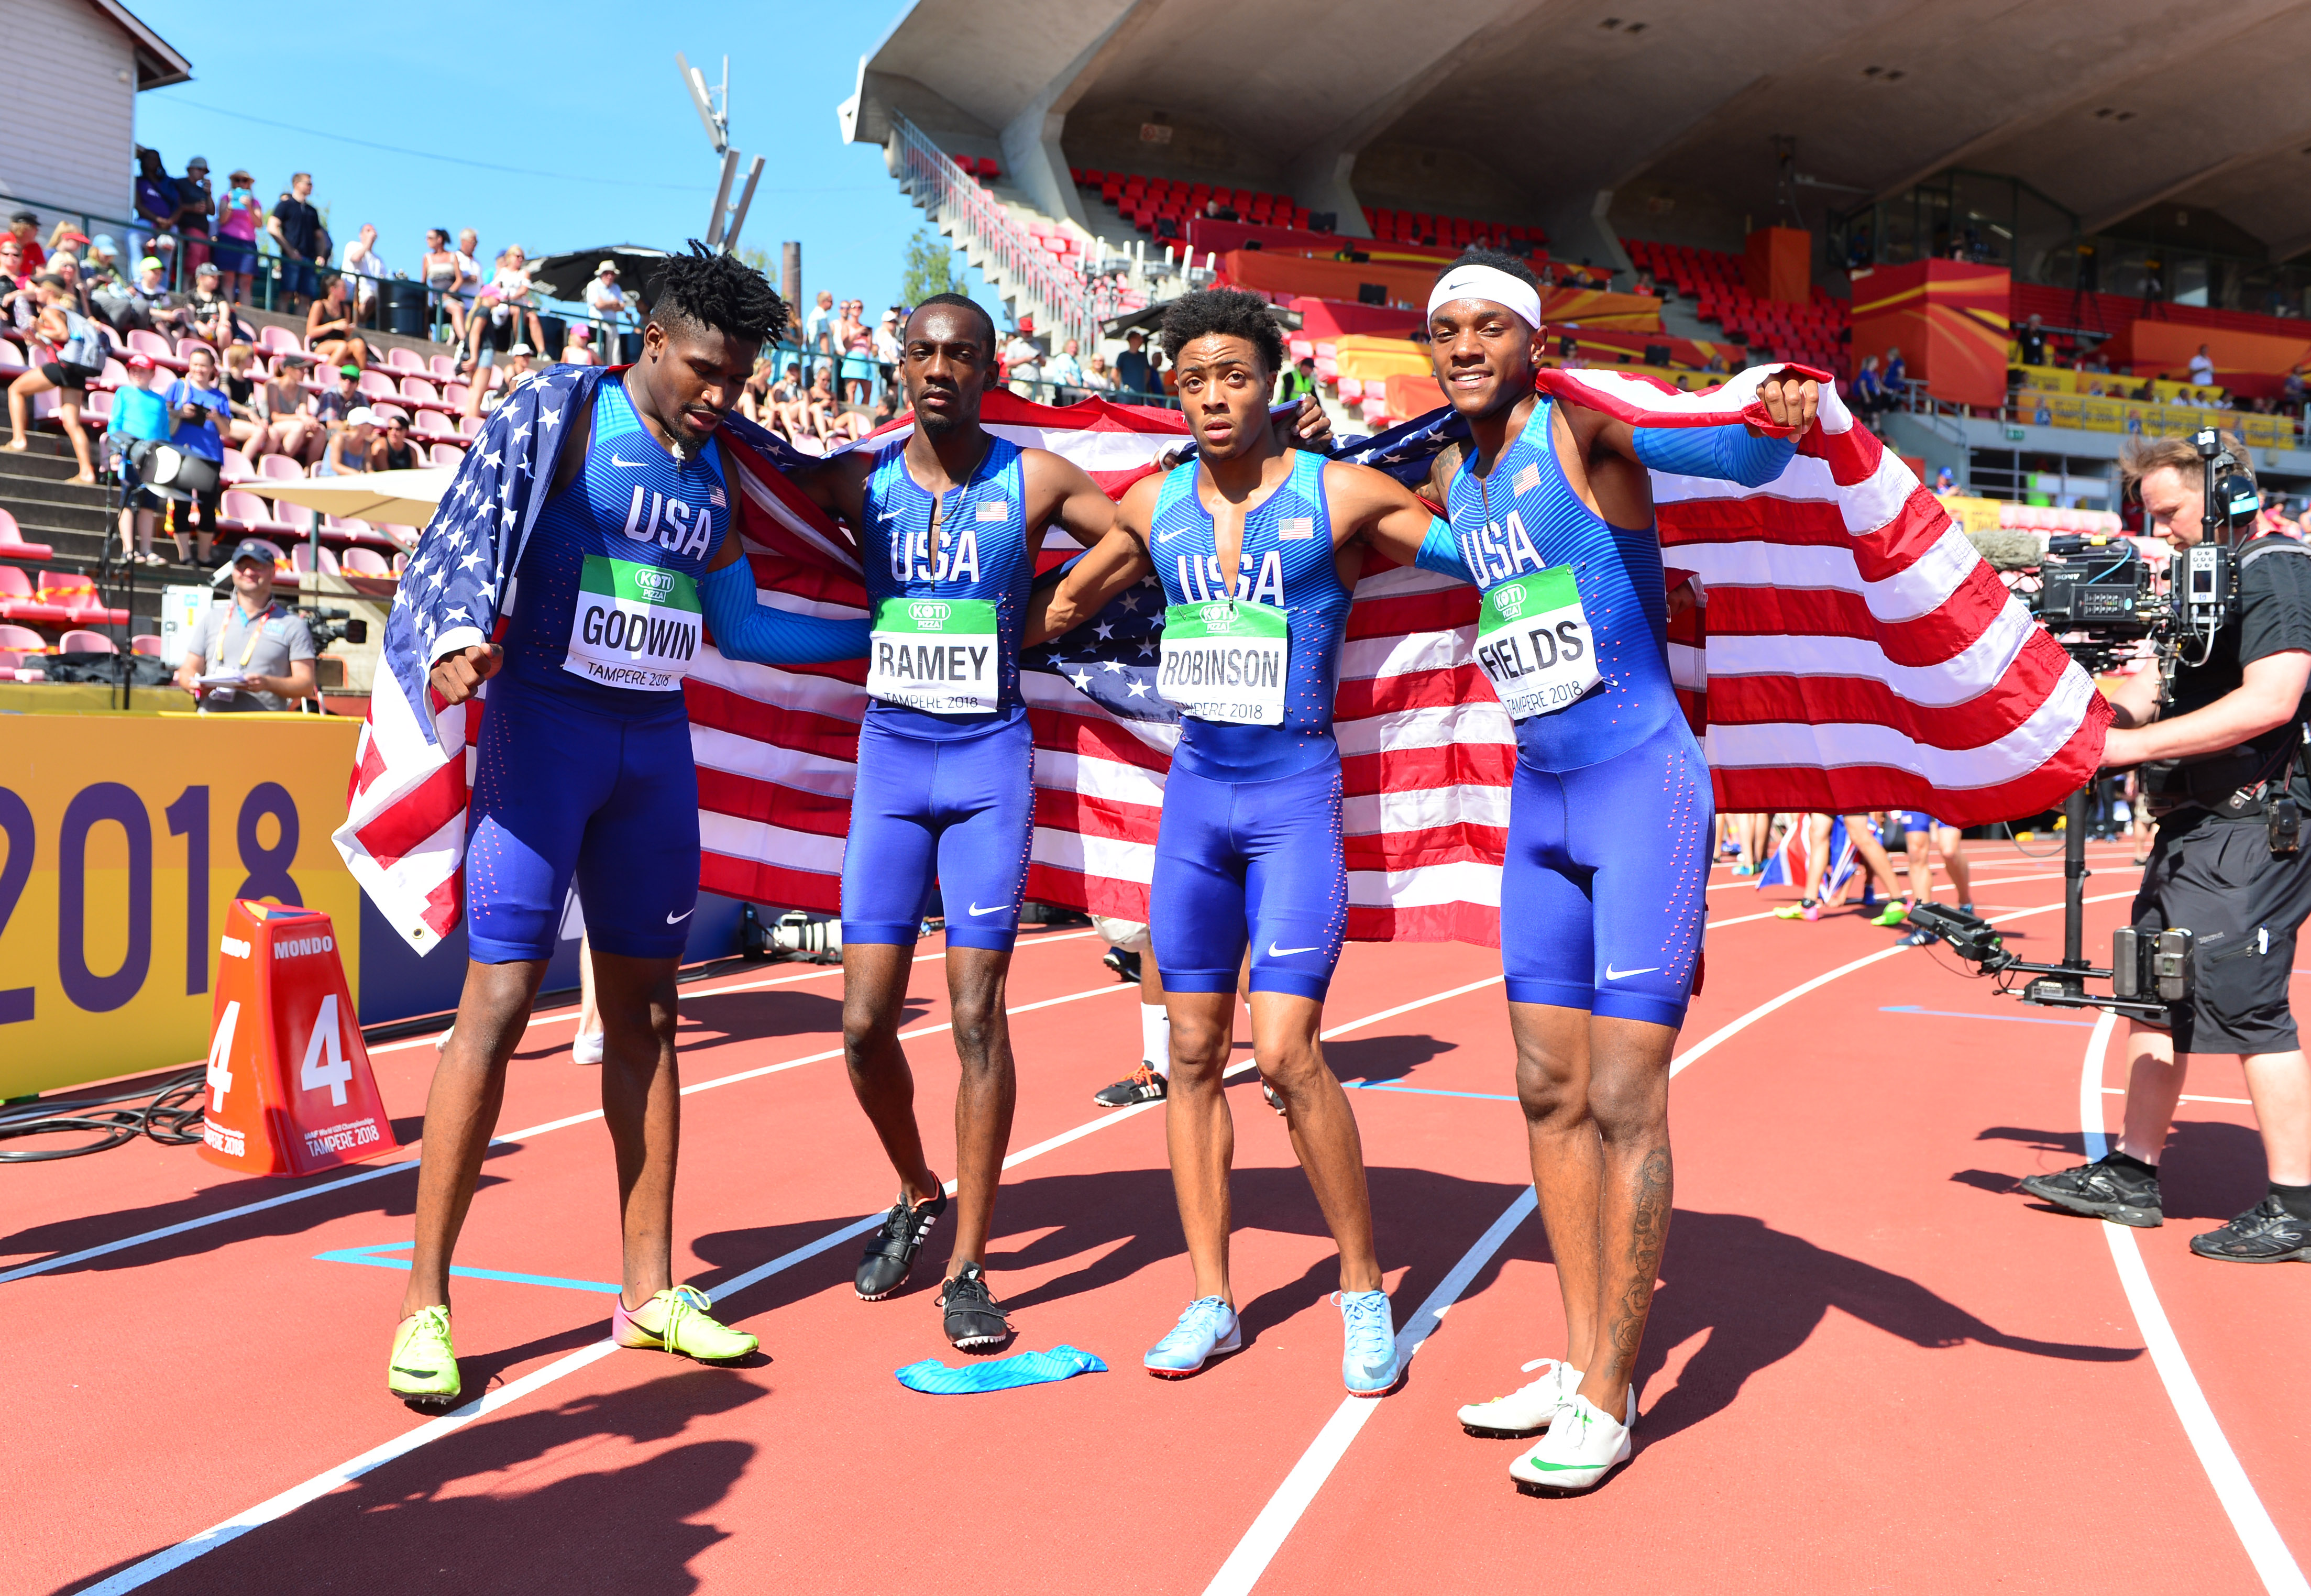 Robinson (second from right) after helping the USA U20 team finish second at the World Junior Championships in Finland in 2018; Kirby Lee/Image Of Sport